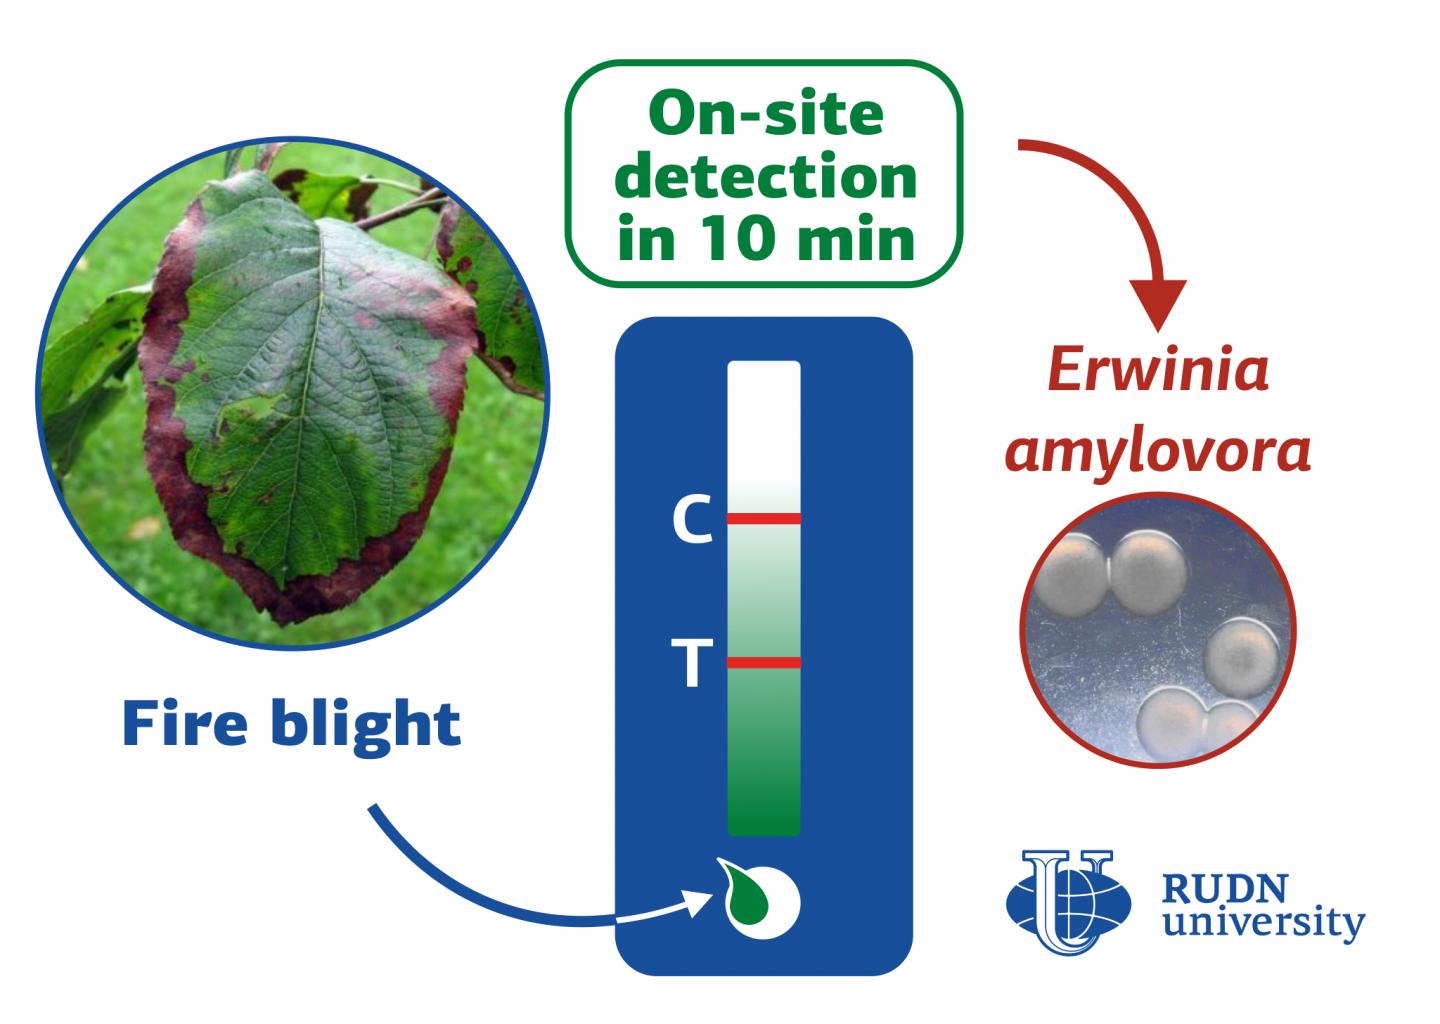 RUDN University Biologists Develop a Rapid Test for Detecting the Fire Blight in Plants